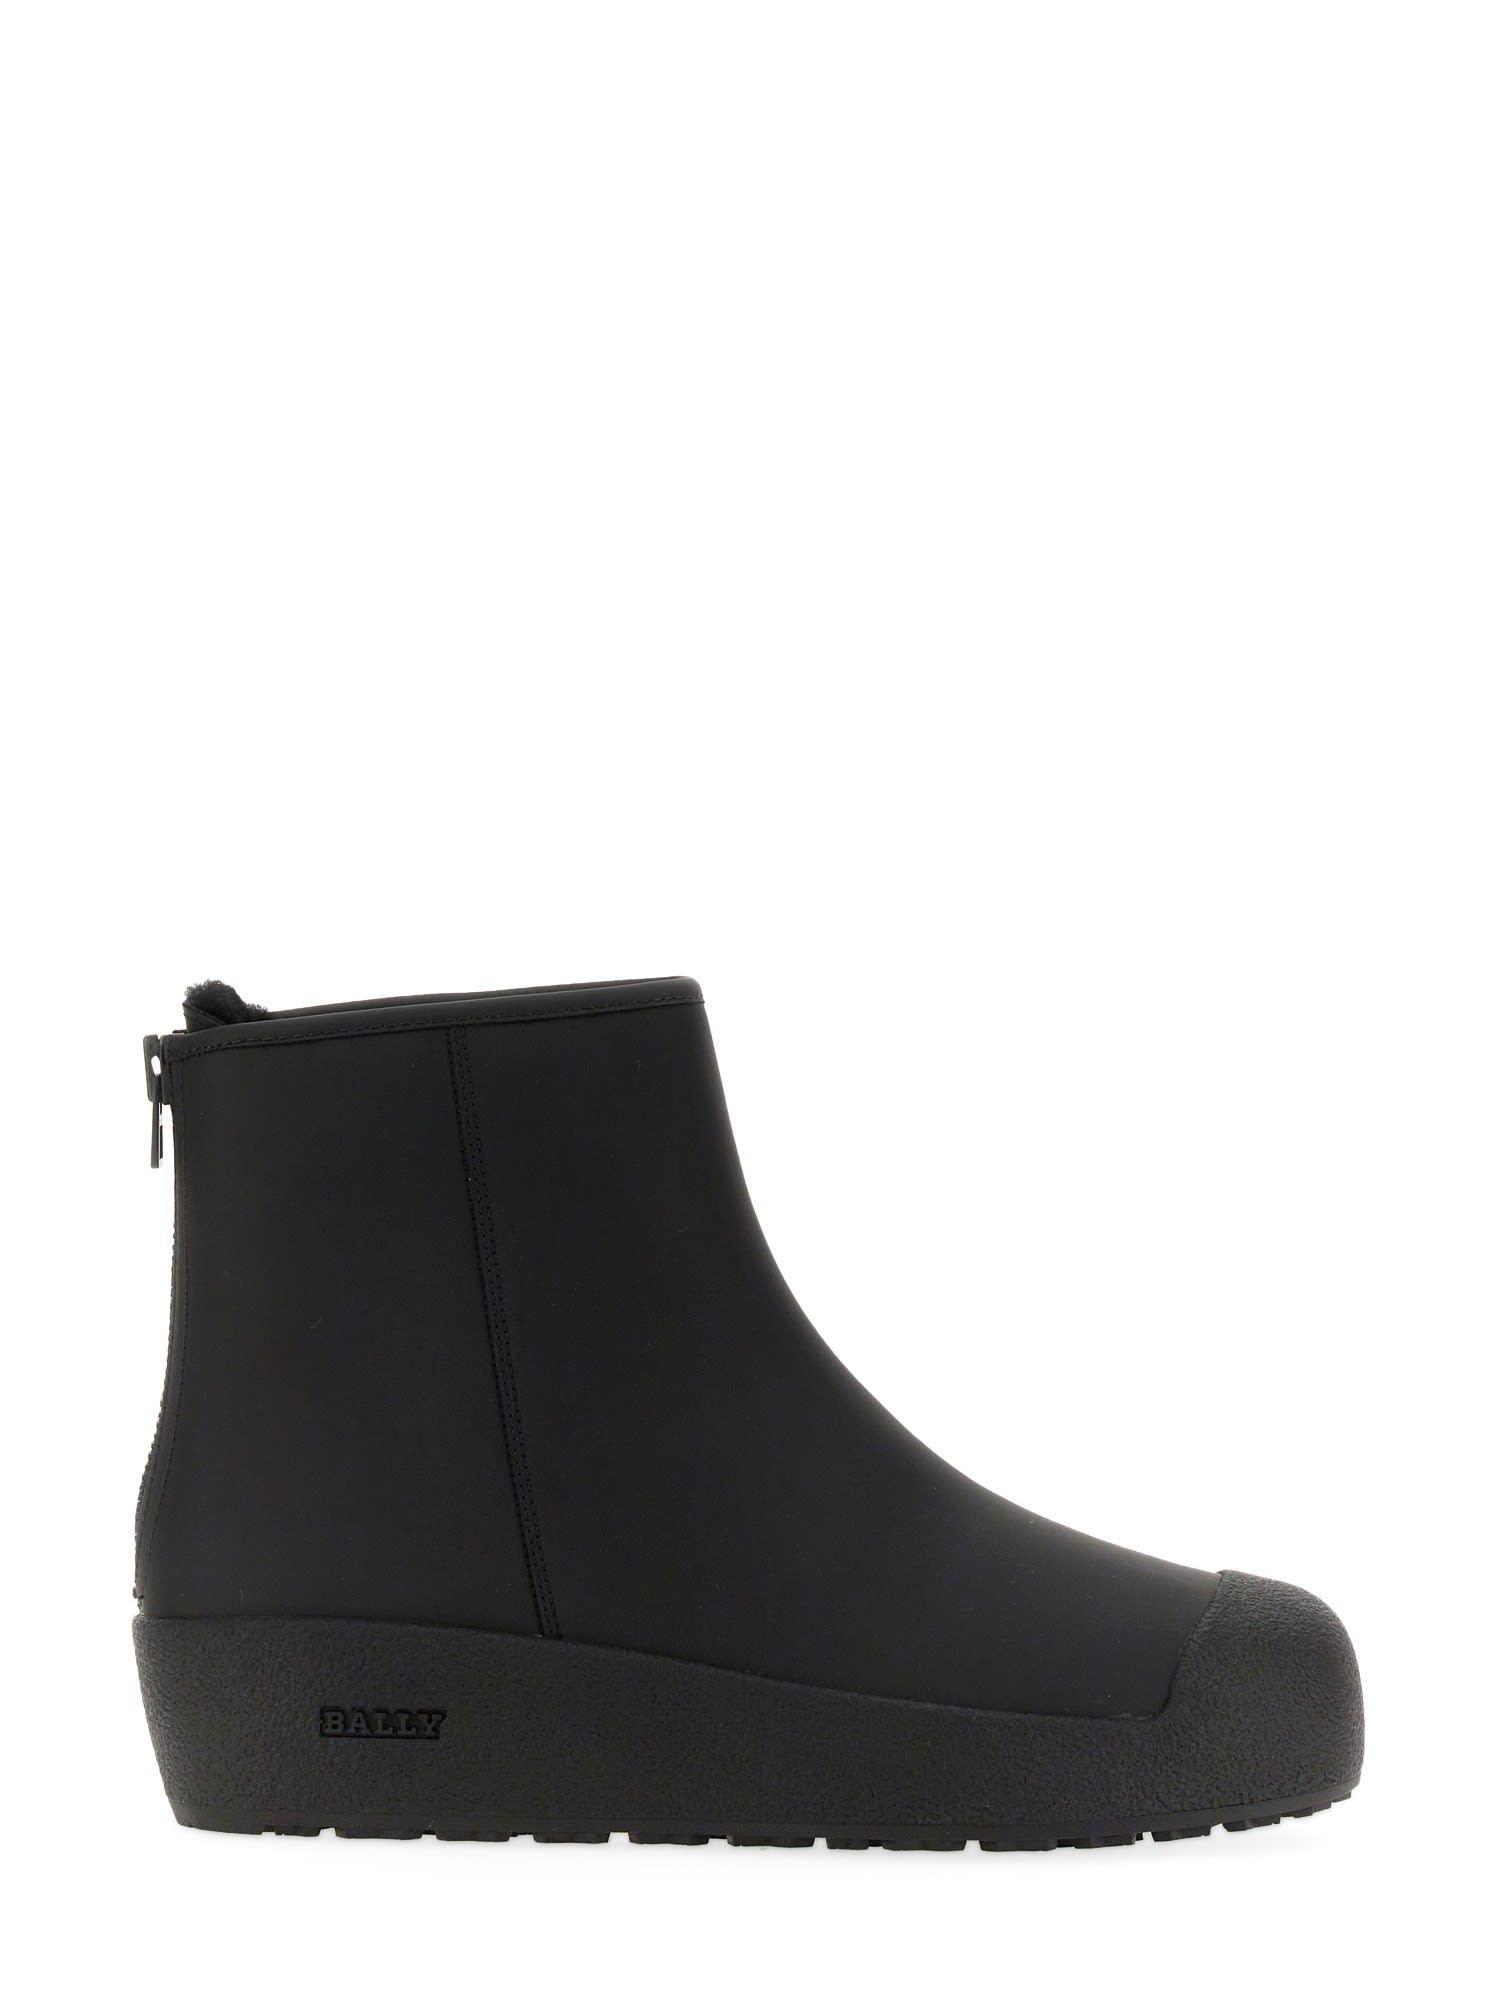 BALLY CURLING BOOT